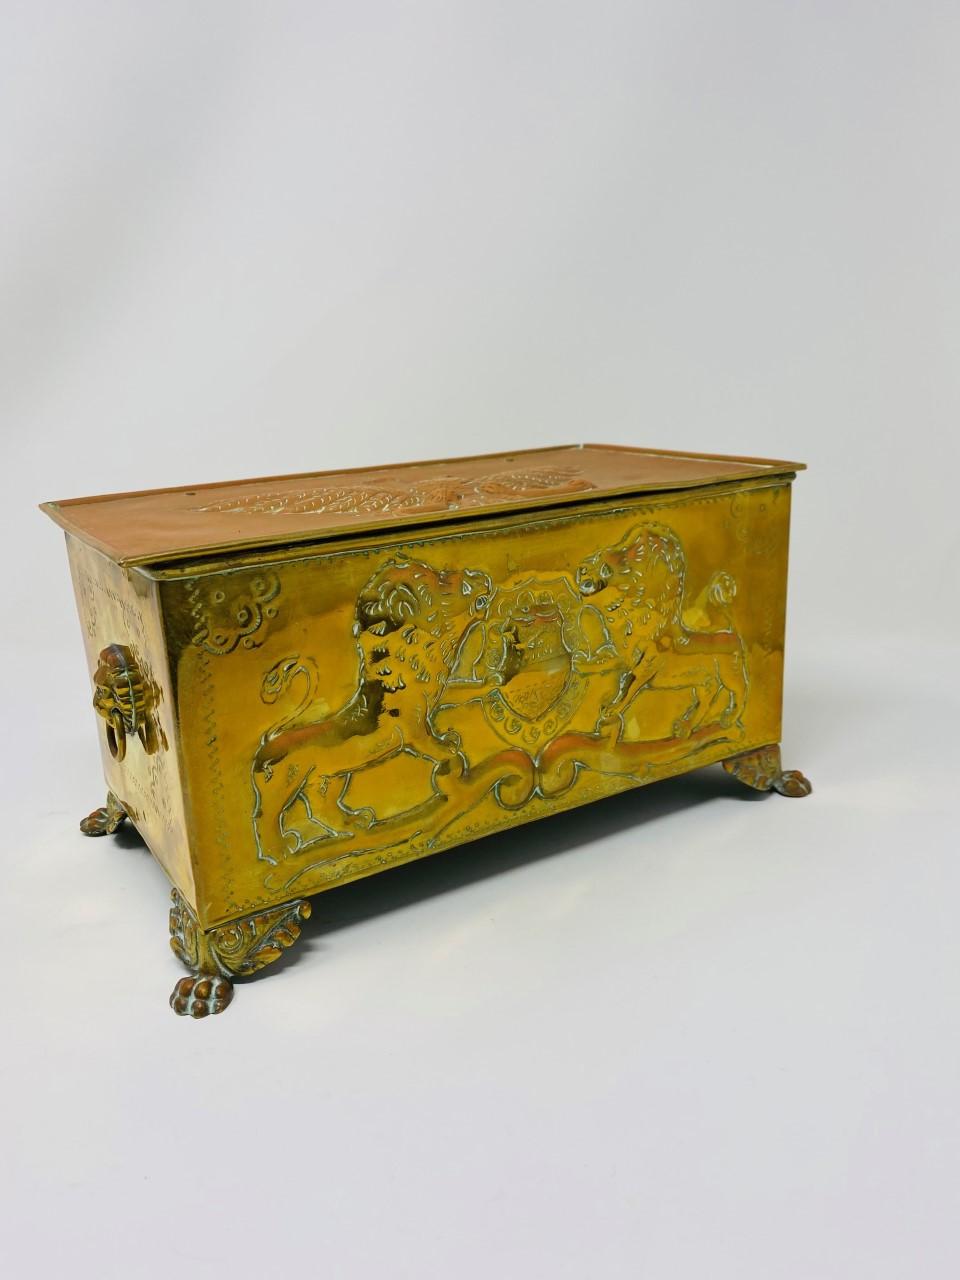 Empire Antique Imperial Anglo-Russian Brass Cigar Humidor Box 'Late 1800’s'